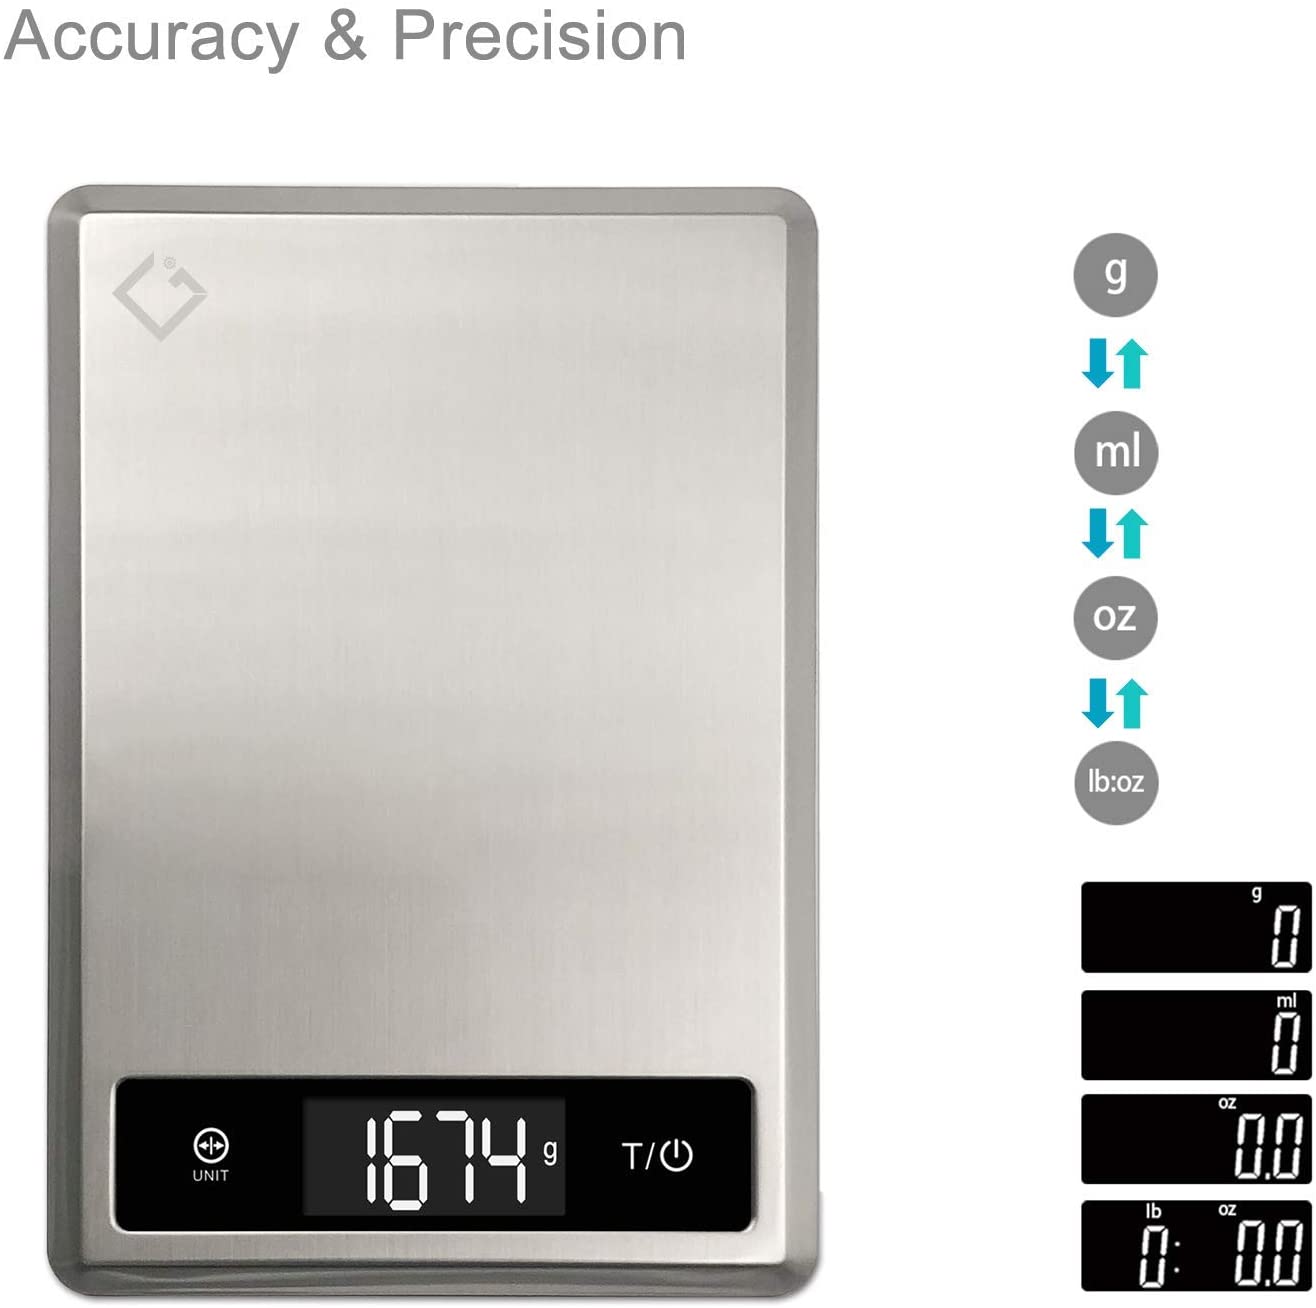 CGI Digital Food Weighing Kitchen Scale, Stainless Steel, Anti Thumb Impression Panel & Tare Function (Large Display)